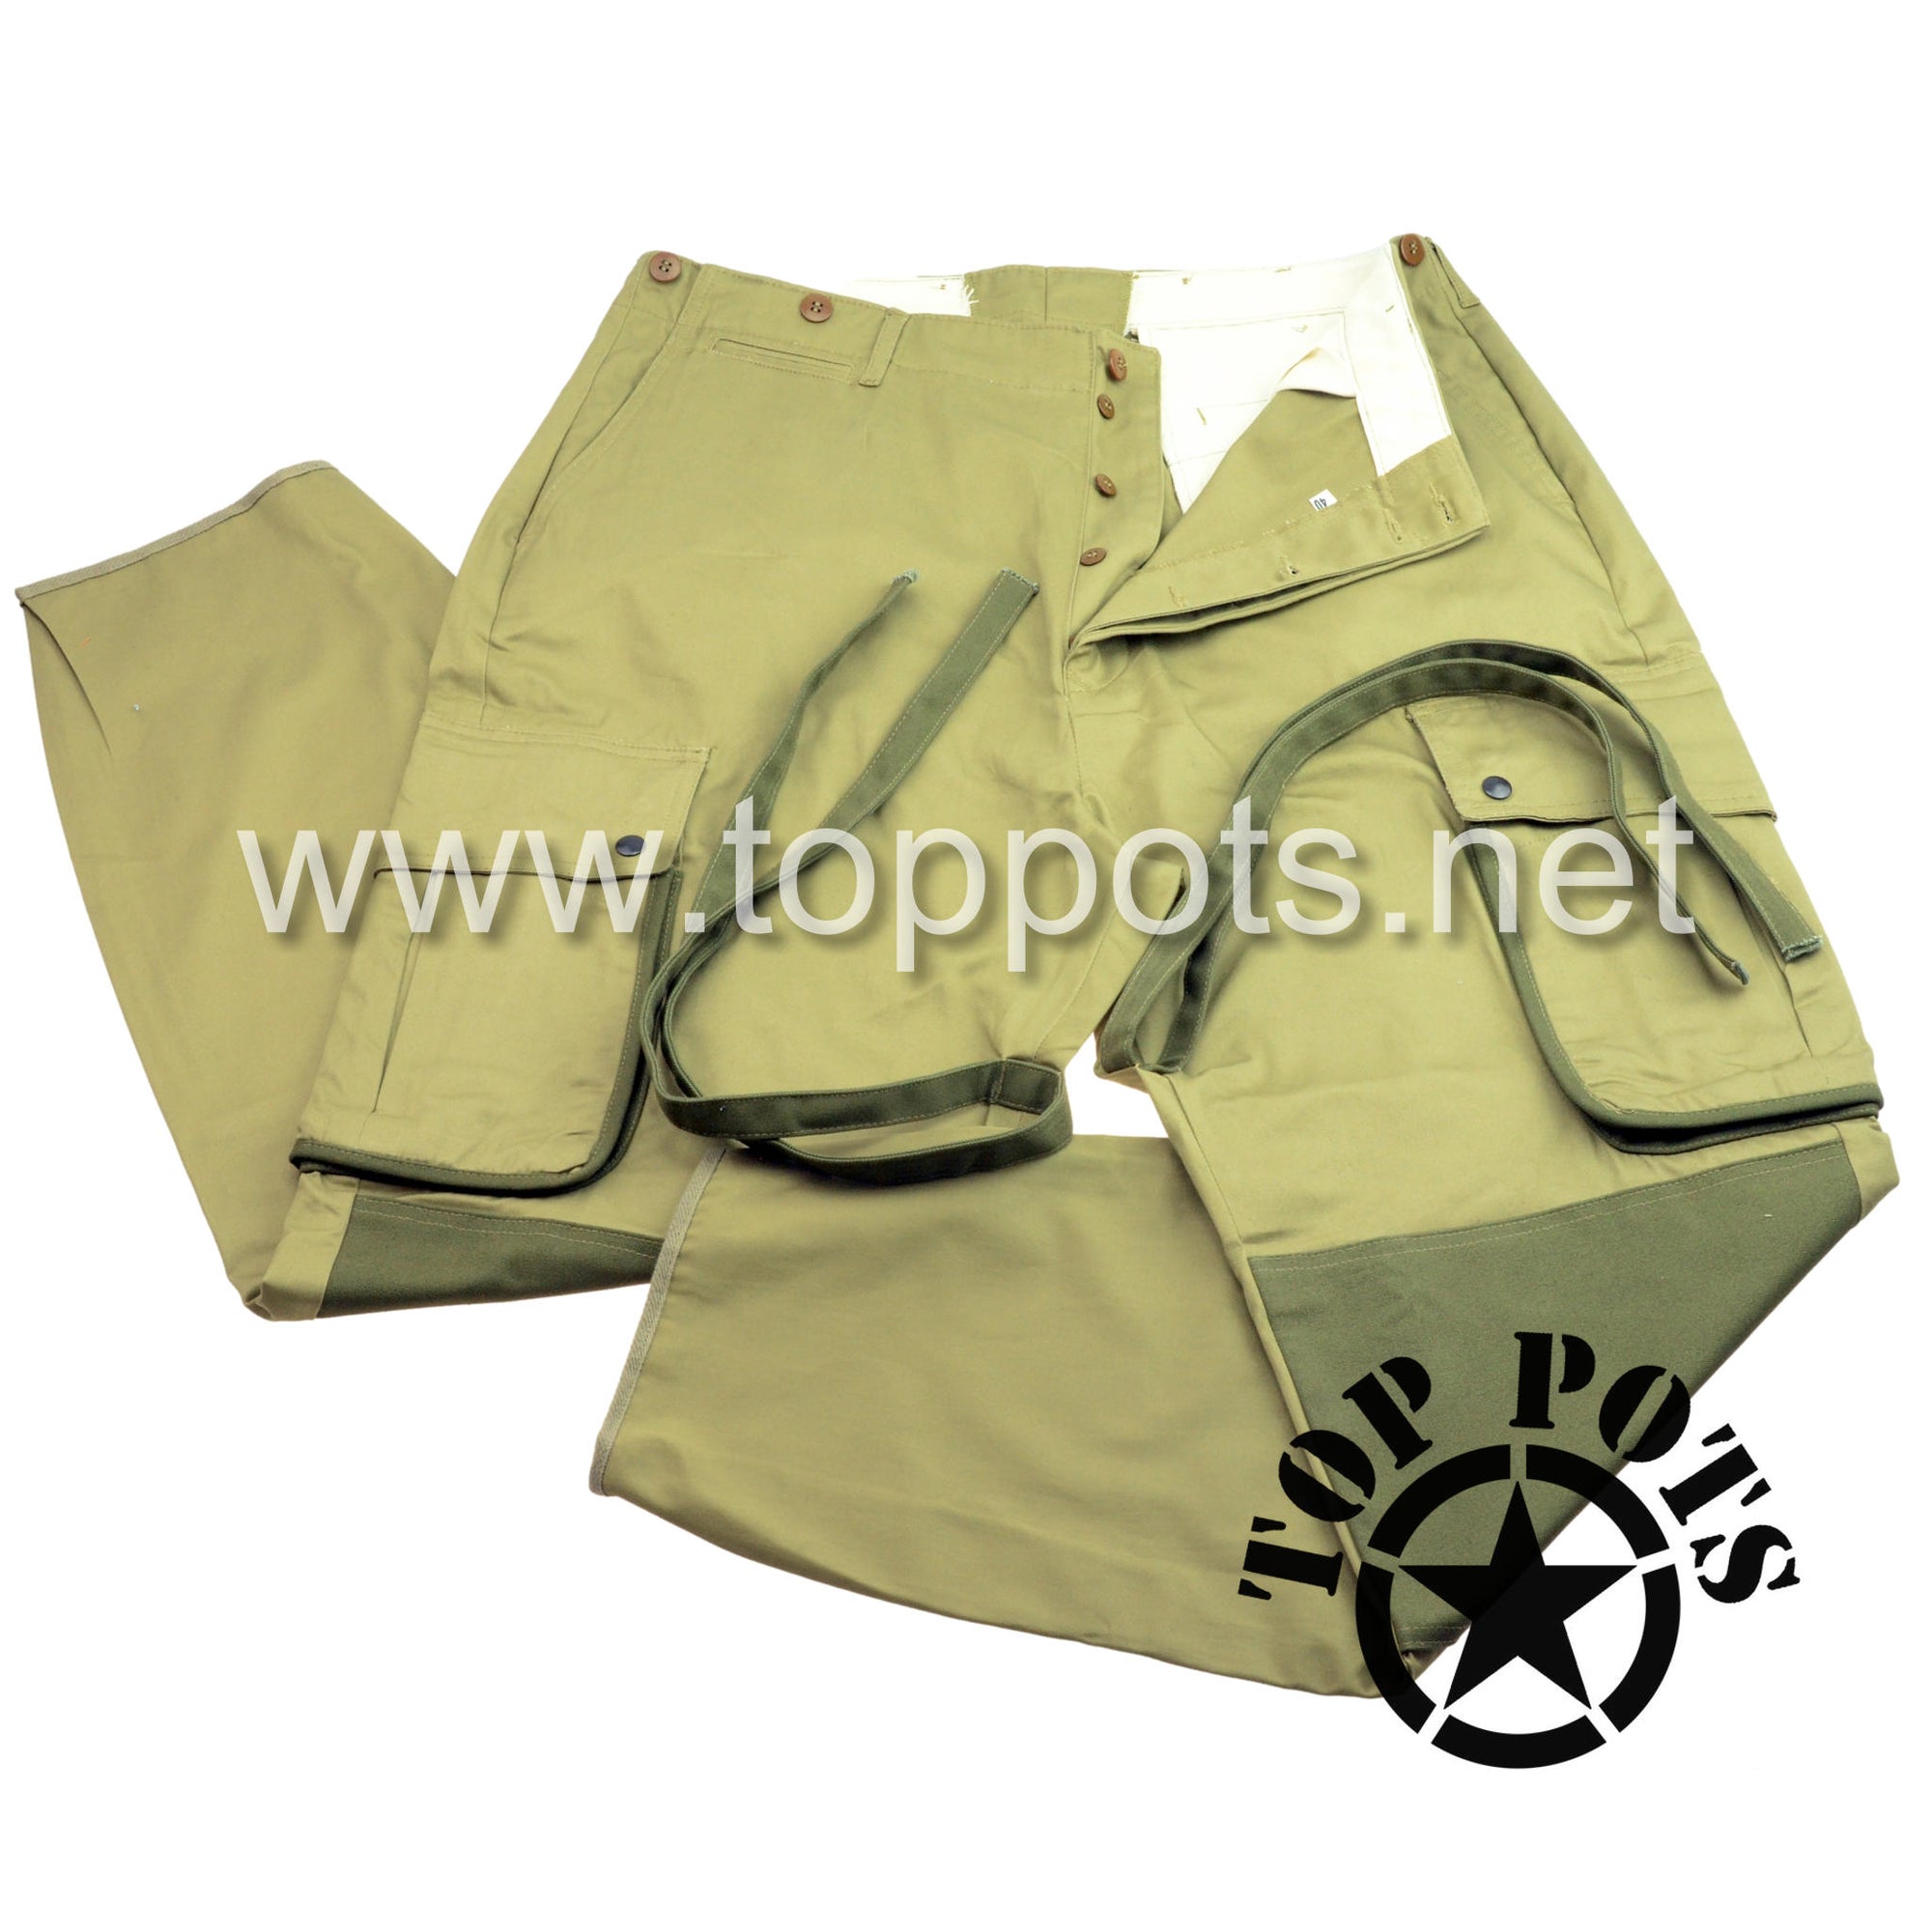 WWII US Army Reproduction M1942 Cotton Enlisted Paratrooper Combat Uniform Airborne Trousers – Pant, Parachute Jumper, M1942 (D Day Modified)